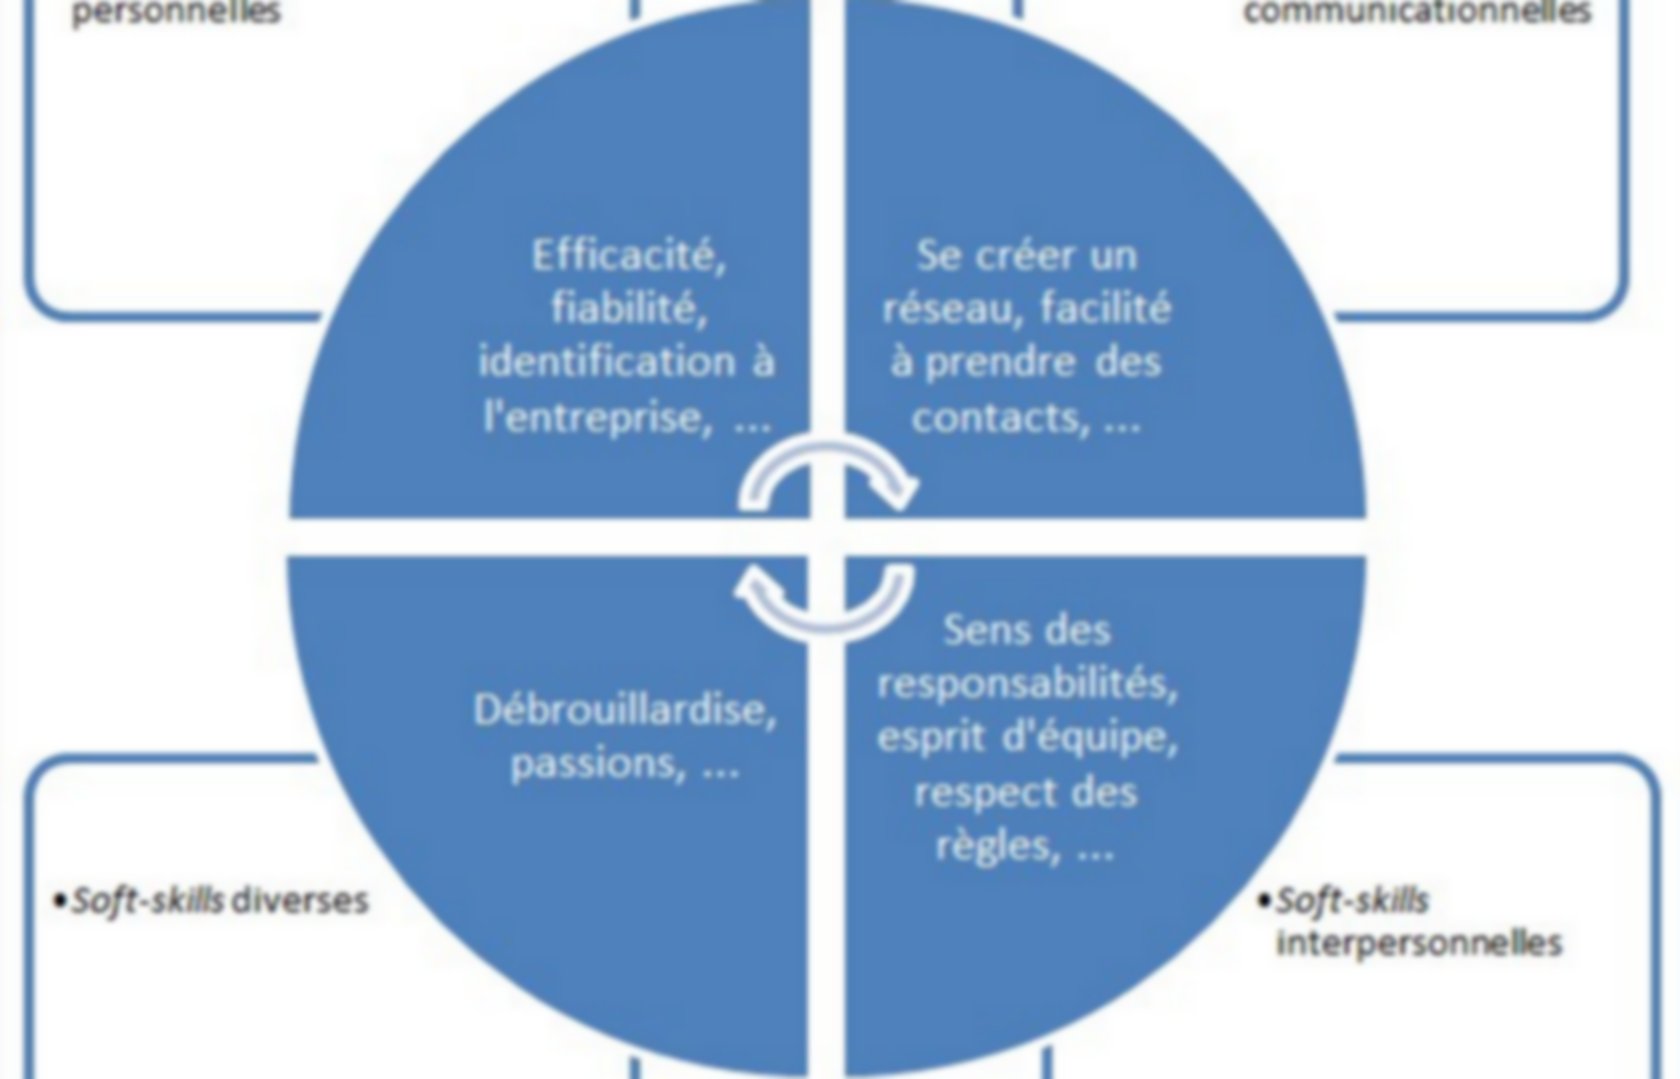 Qualités humaines et relationnelles (soft skills)  Pearltrees